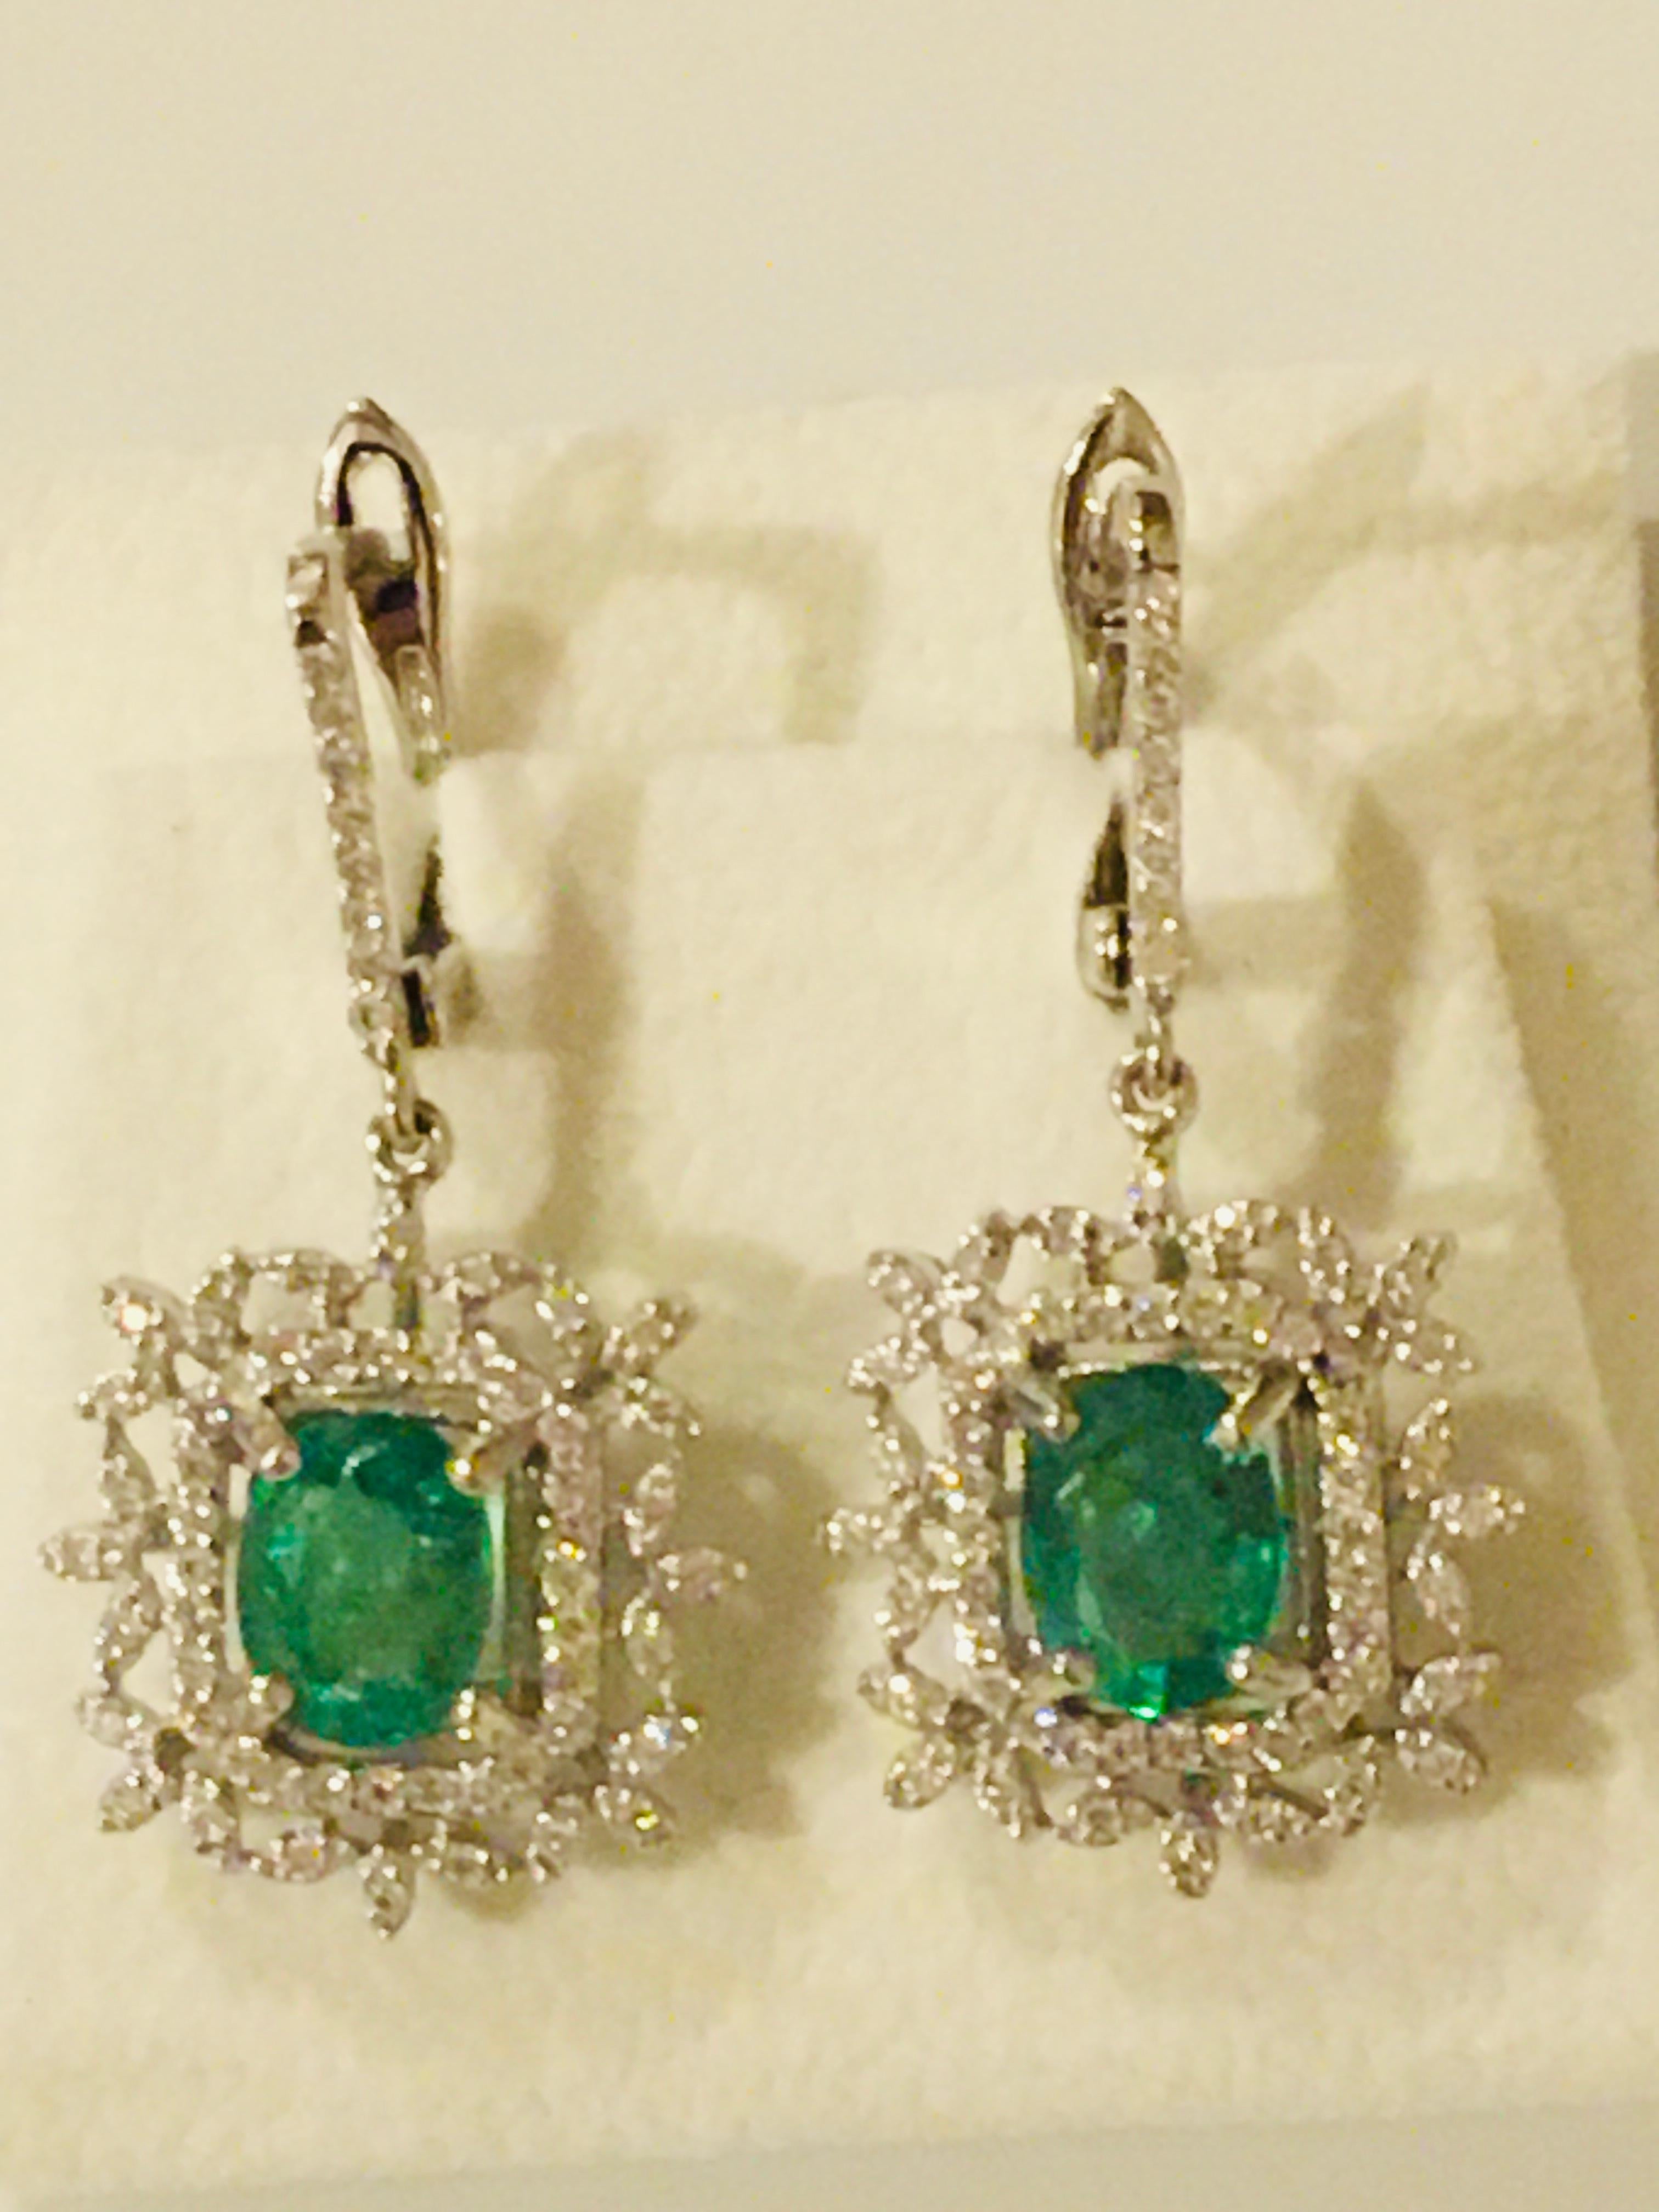 Exclusive design in 18k gold with natural Zambia emeralds ct 3,79 and natural diamonds round brilliant cut ct 0,80 F/VS,
Handmade by artisan goldsmith.
Excellent manufacture.
Complete with AIG report.

Note: On my shipment with my currier, customers